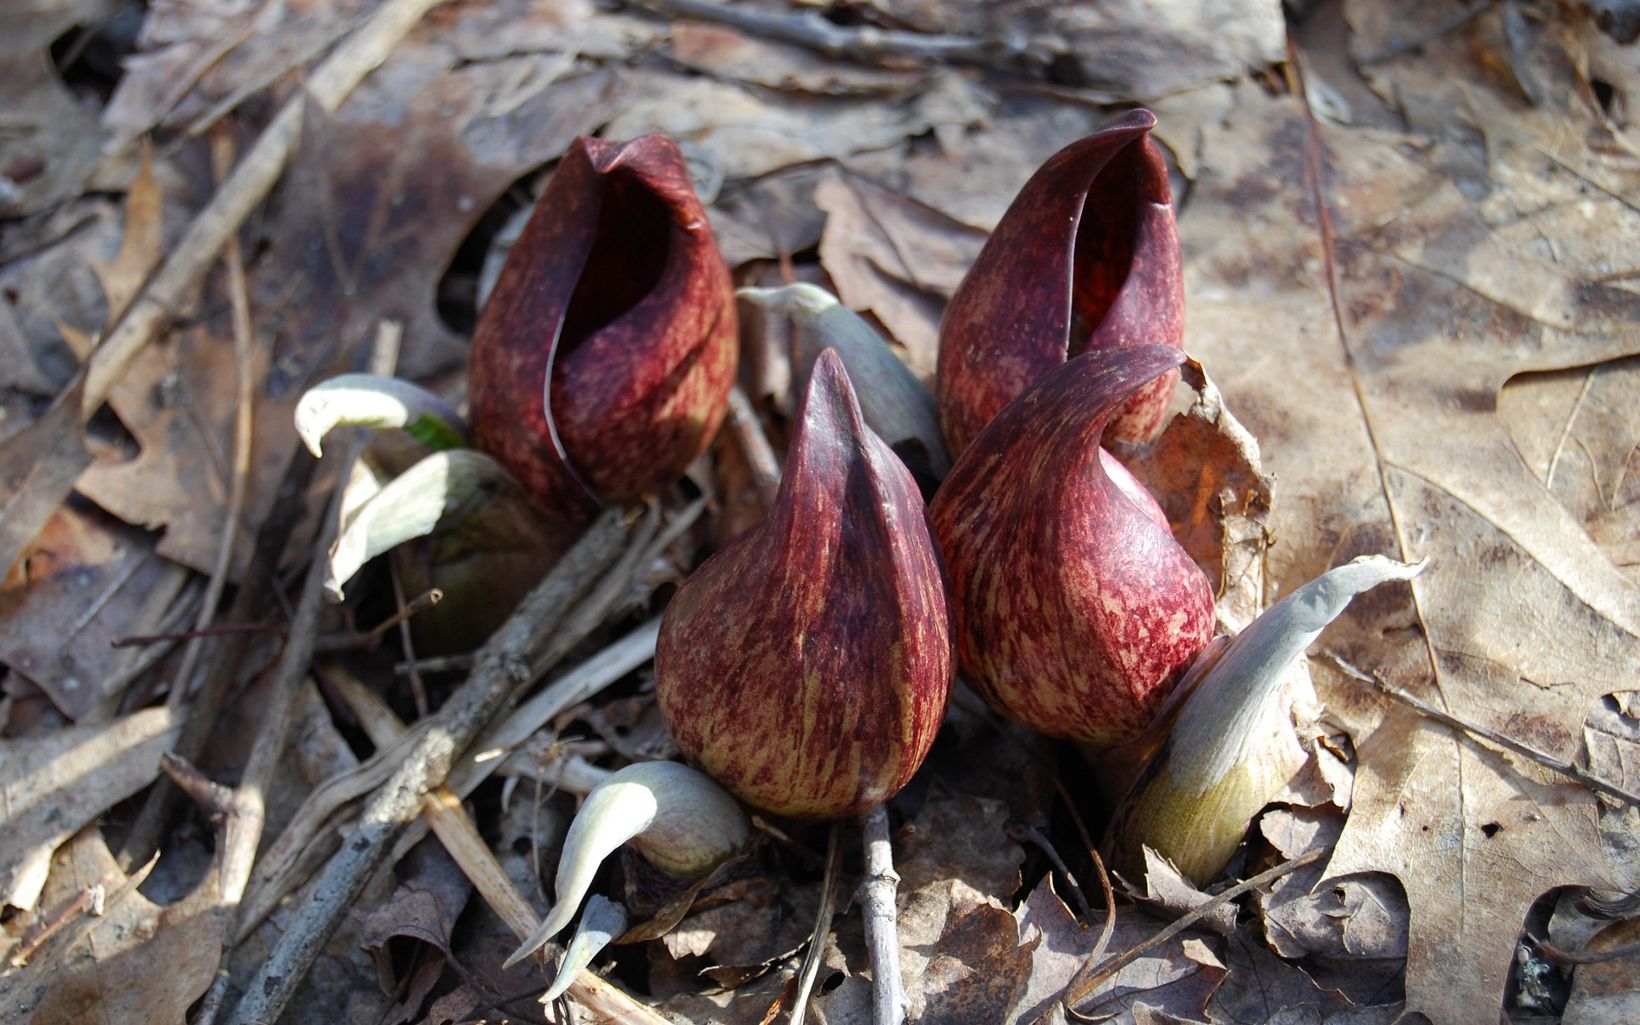 Skunk cabbage plants emerging out of the leaf-covered ground in spring.